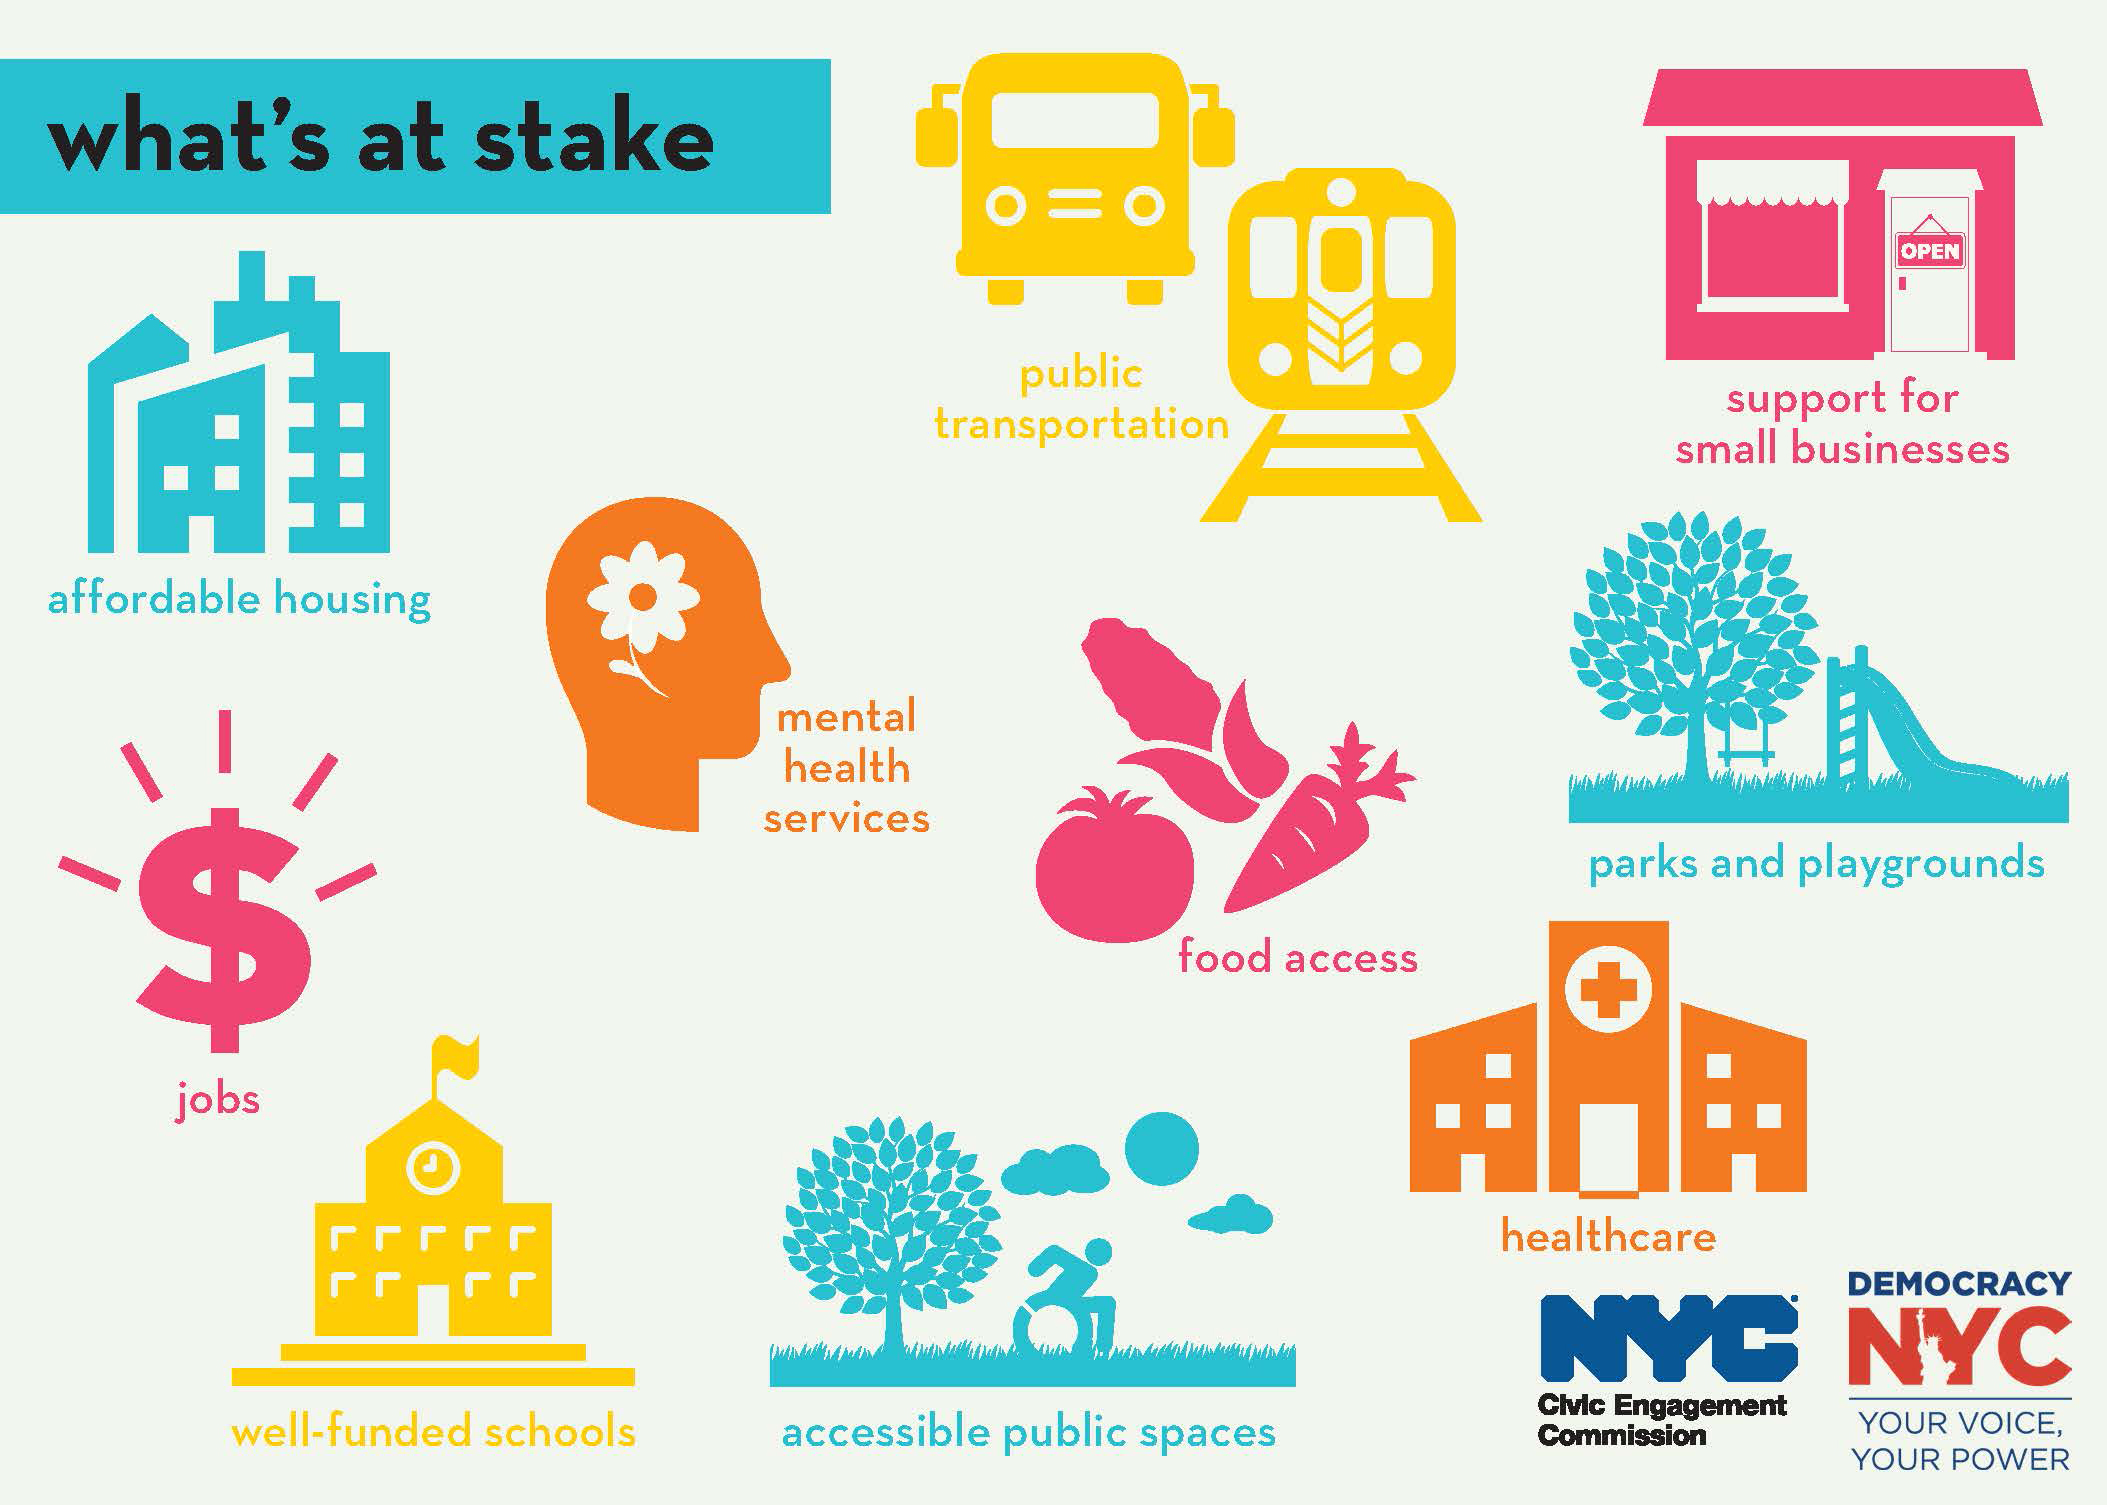 A graphic titled What's at Stake with images and corresponding text which reads: affordable housing, jobs, mental health services, food access, parks and playgrounds, healthcare, accessible public spaces, and well-funded schools.